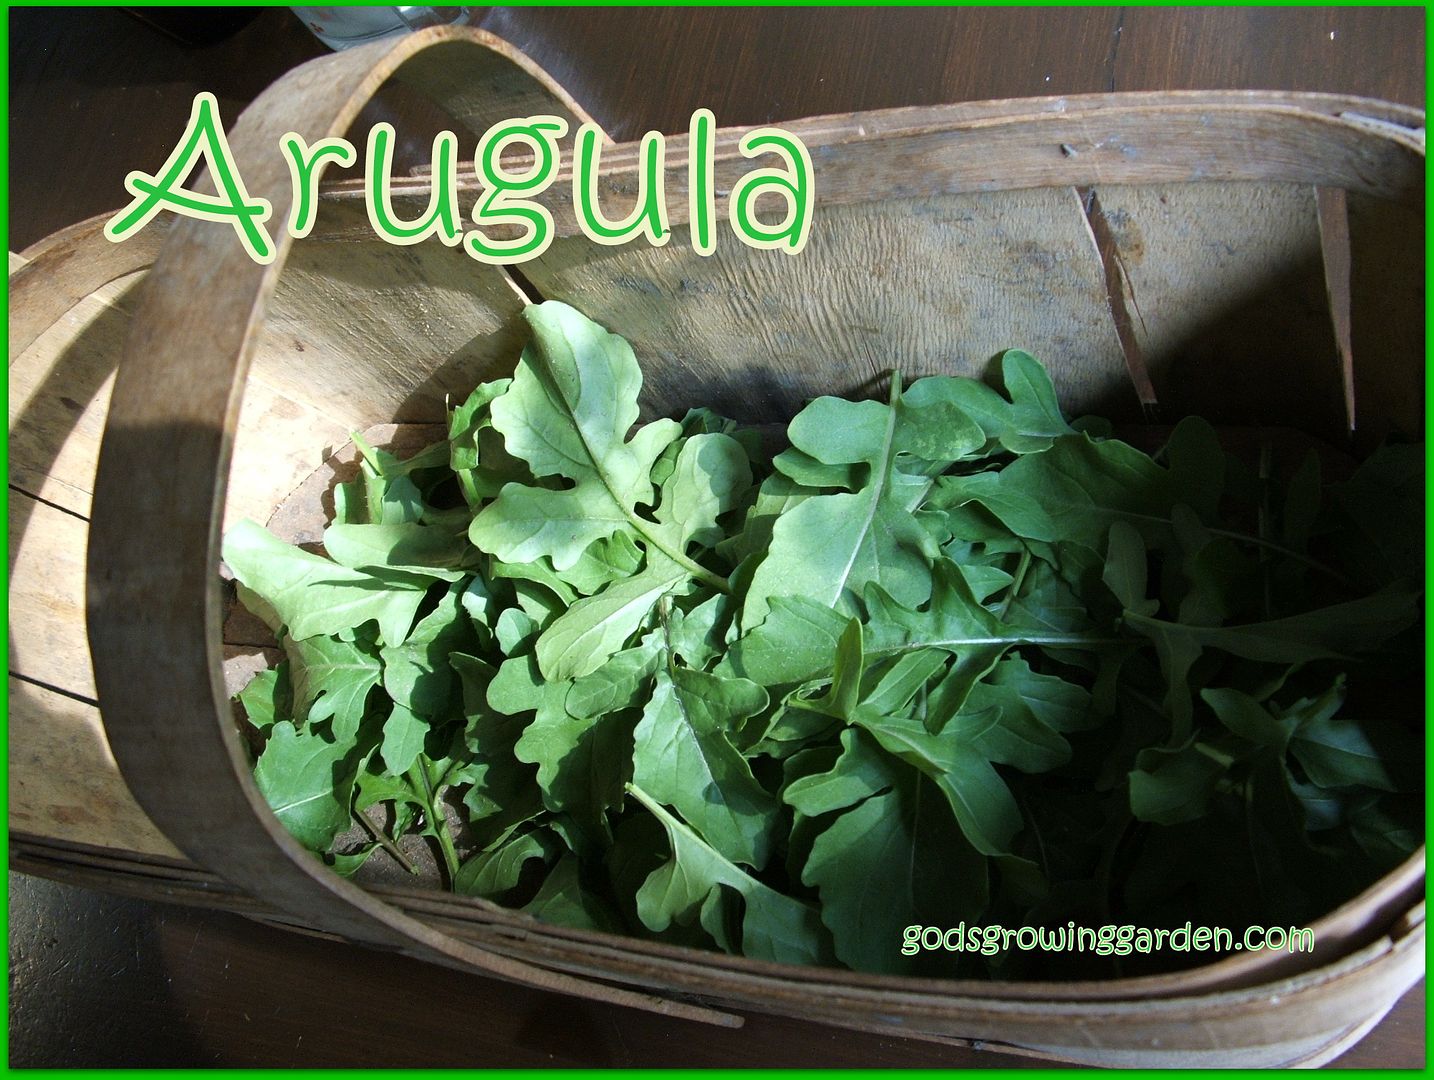 Arugula by Angie Ouellette-Tower for godsgrowinggarden.com photo 009_zpsc4cebdfe.jpg